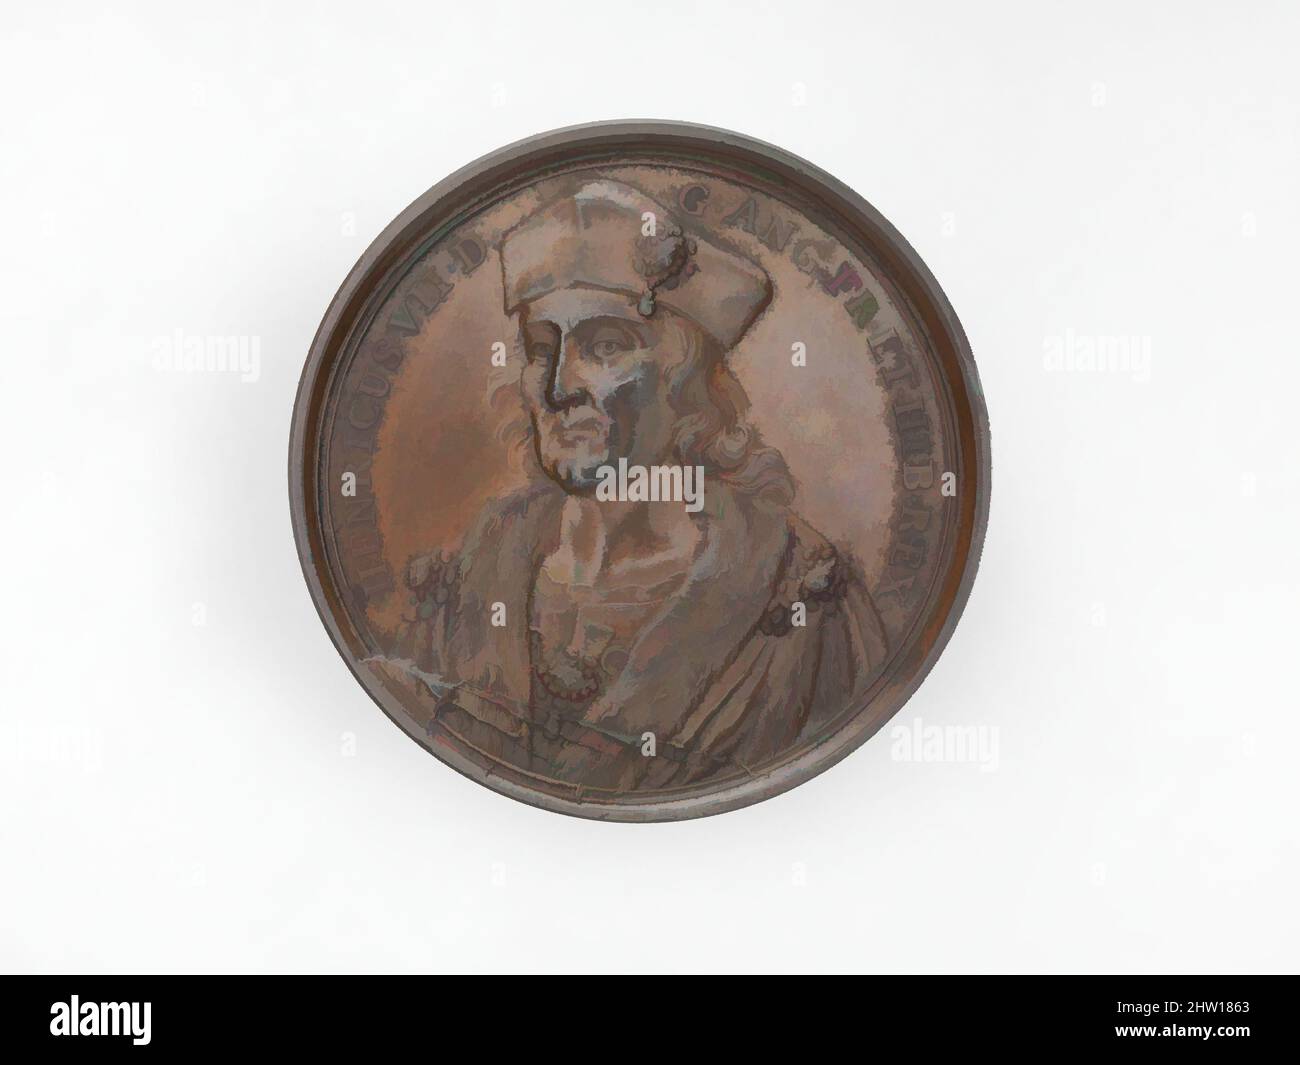 Art inspired by Henry VII, 1731–32, British, Bronze, Diameter (confirmed): 4.1 cm (41 mm), Medals and Plaquettes, Medalist: Jean Dassier (Geneva 1676–1763 Geneva), This medal of Henry VII belongs to the English Monarchs series by the Swiss medalist Jean Dassier (1676–1763). Dassier was, Classic works modernized by Artotop with a splash of modernity. Shapes, color and value, eye-catching visual impact on art. Emotions through freedom of artworks in a contemporary way. A timeless message pursuing a wildly creative new direction. Artists turning to the digital medium and creating the Artotop NFT Stock Photo